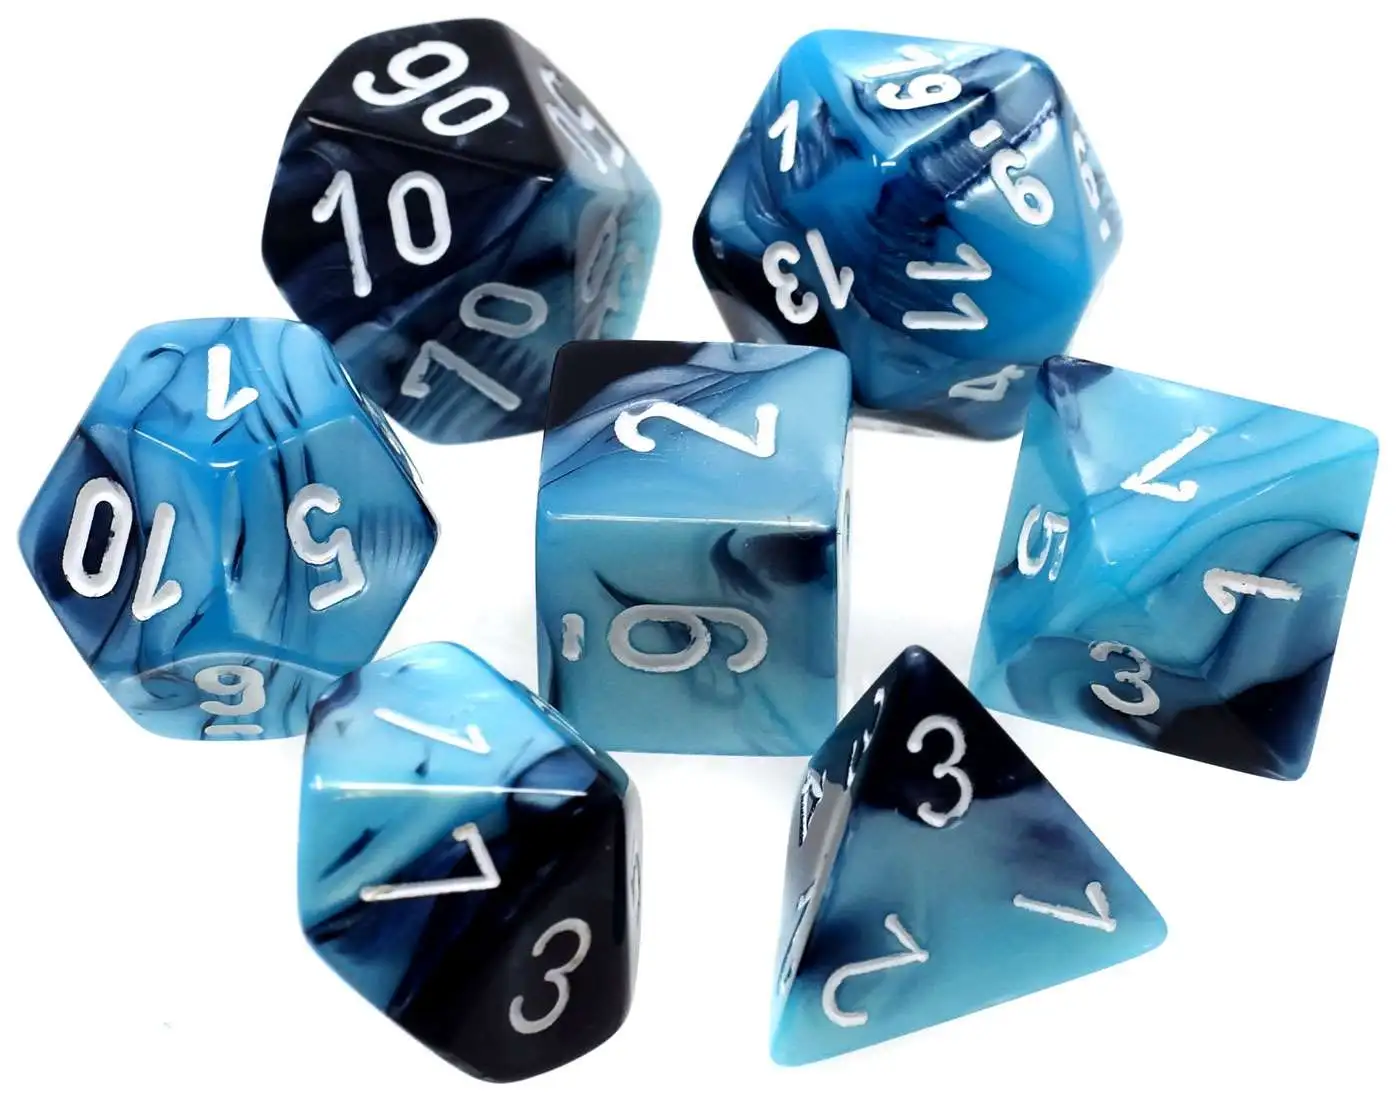 Black with White Numbers Polyhedral 7-Die Nebula Chessex Dice Set 